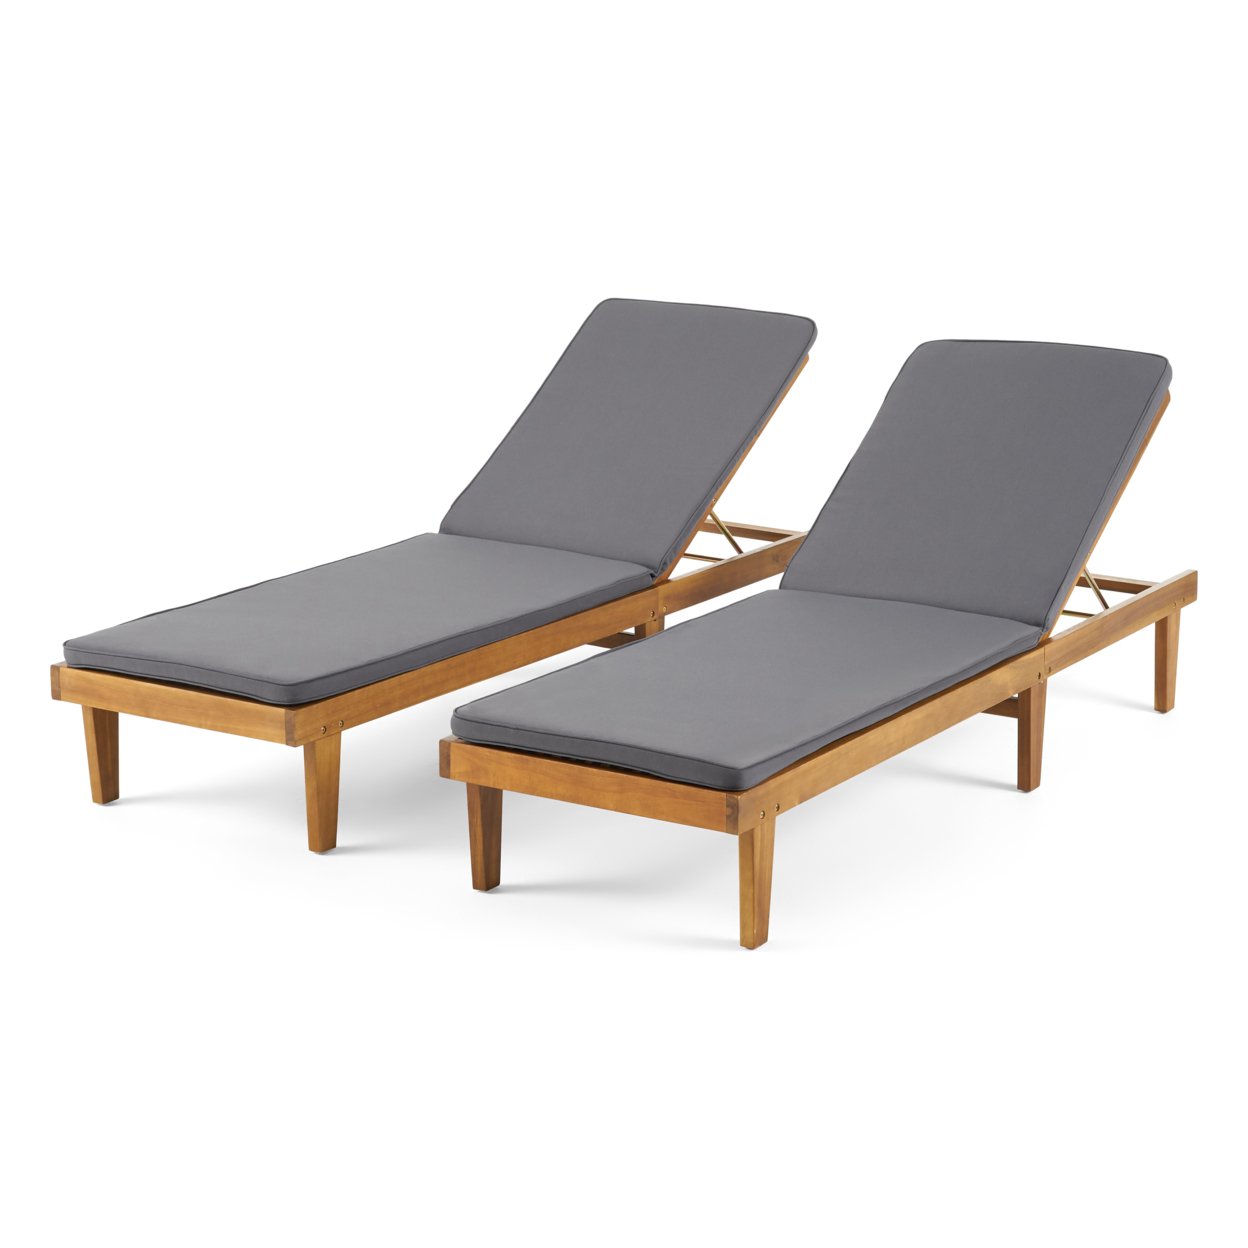 Madge Oudoor Modern Acacia Wood Chaise Lounge With Cushion (Set Of 2) - Teak Finish + Blue